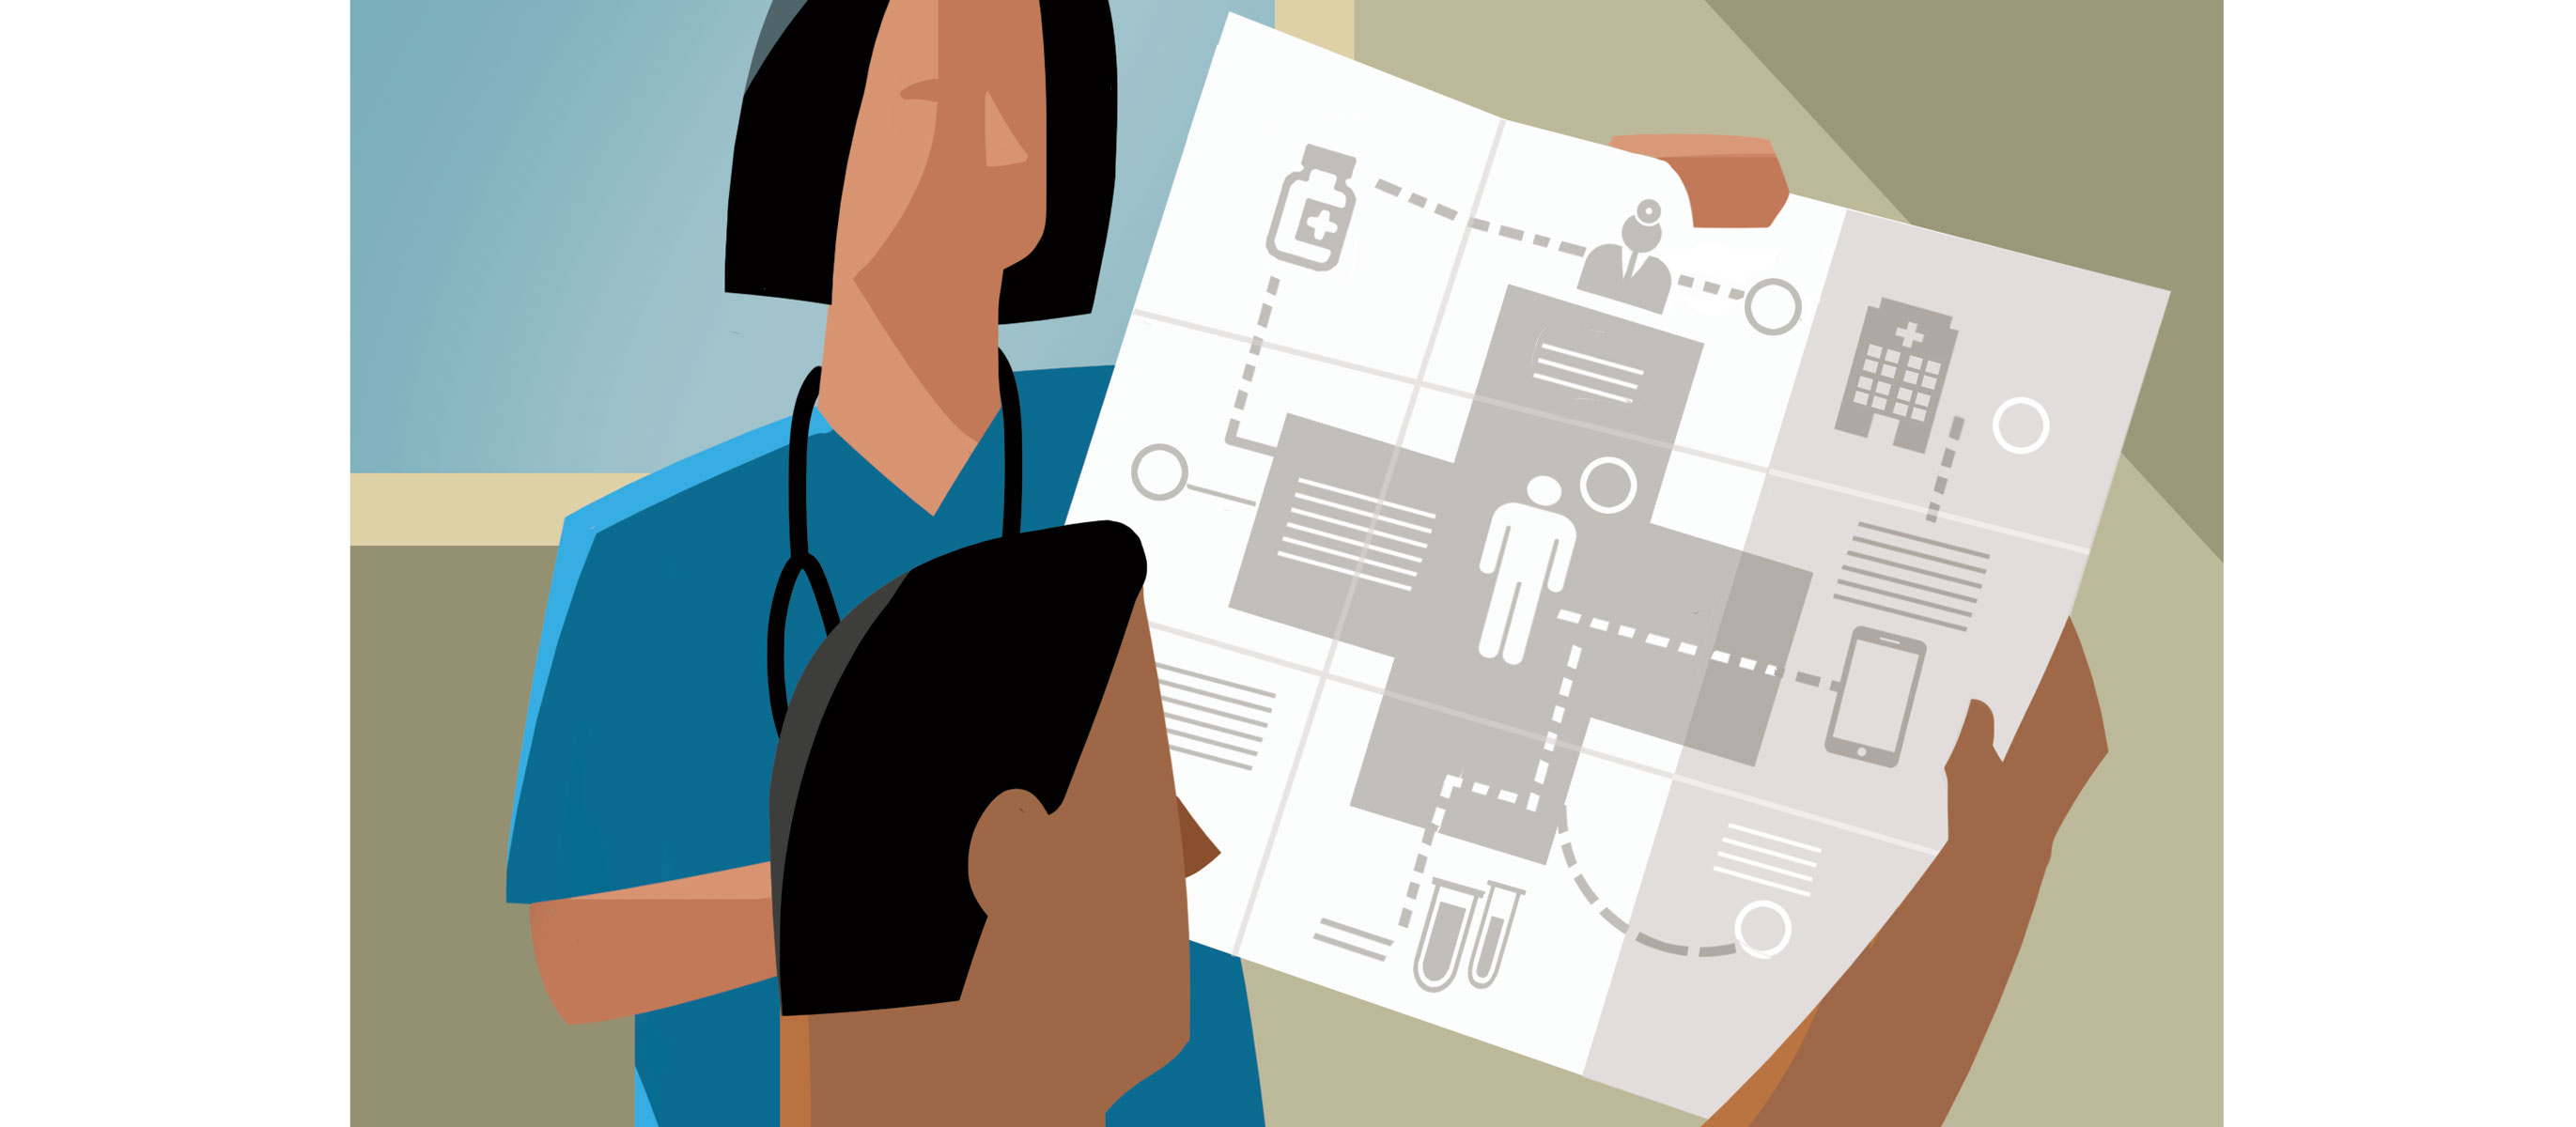 Updated Core Competencies Reflect Evolution of Nurse Navigator Role